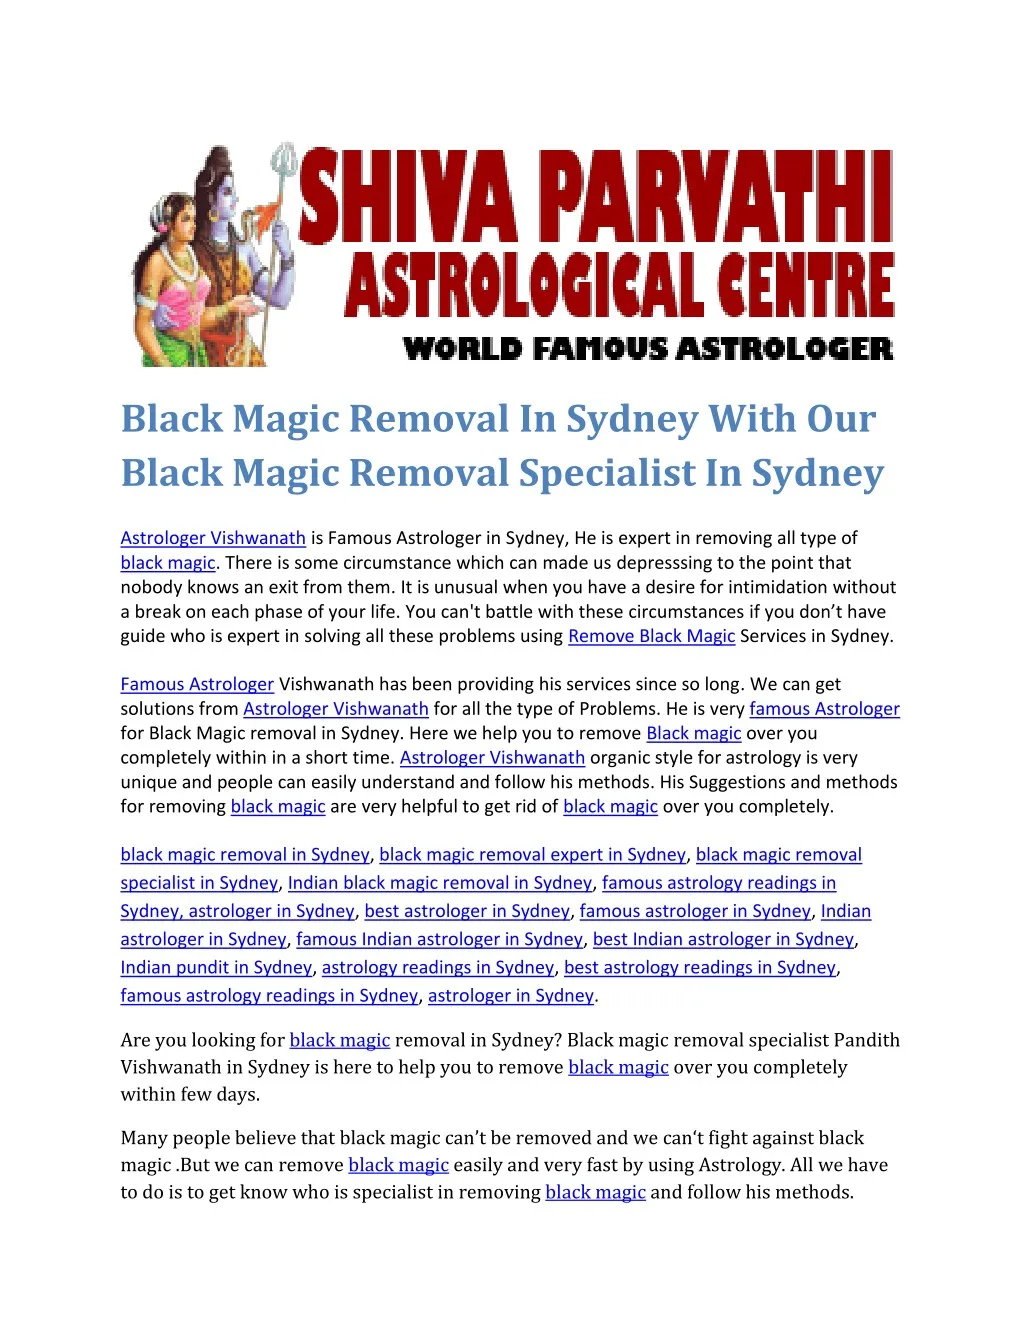 black magic removal in sydney with our black